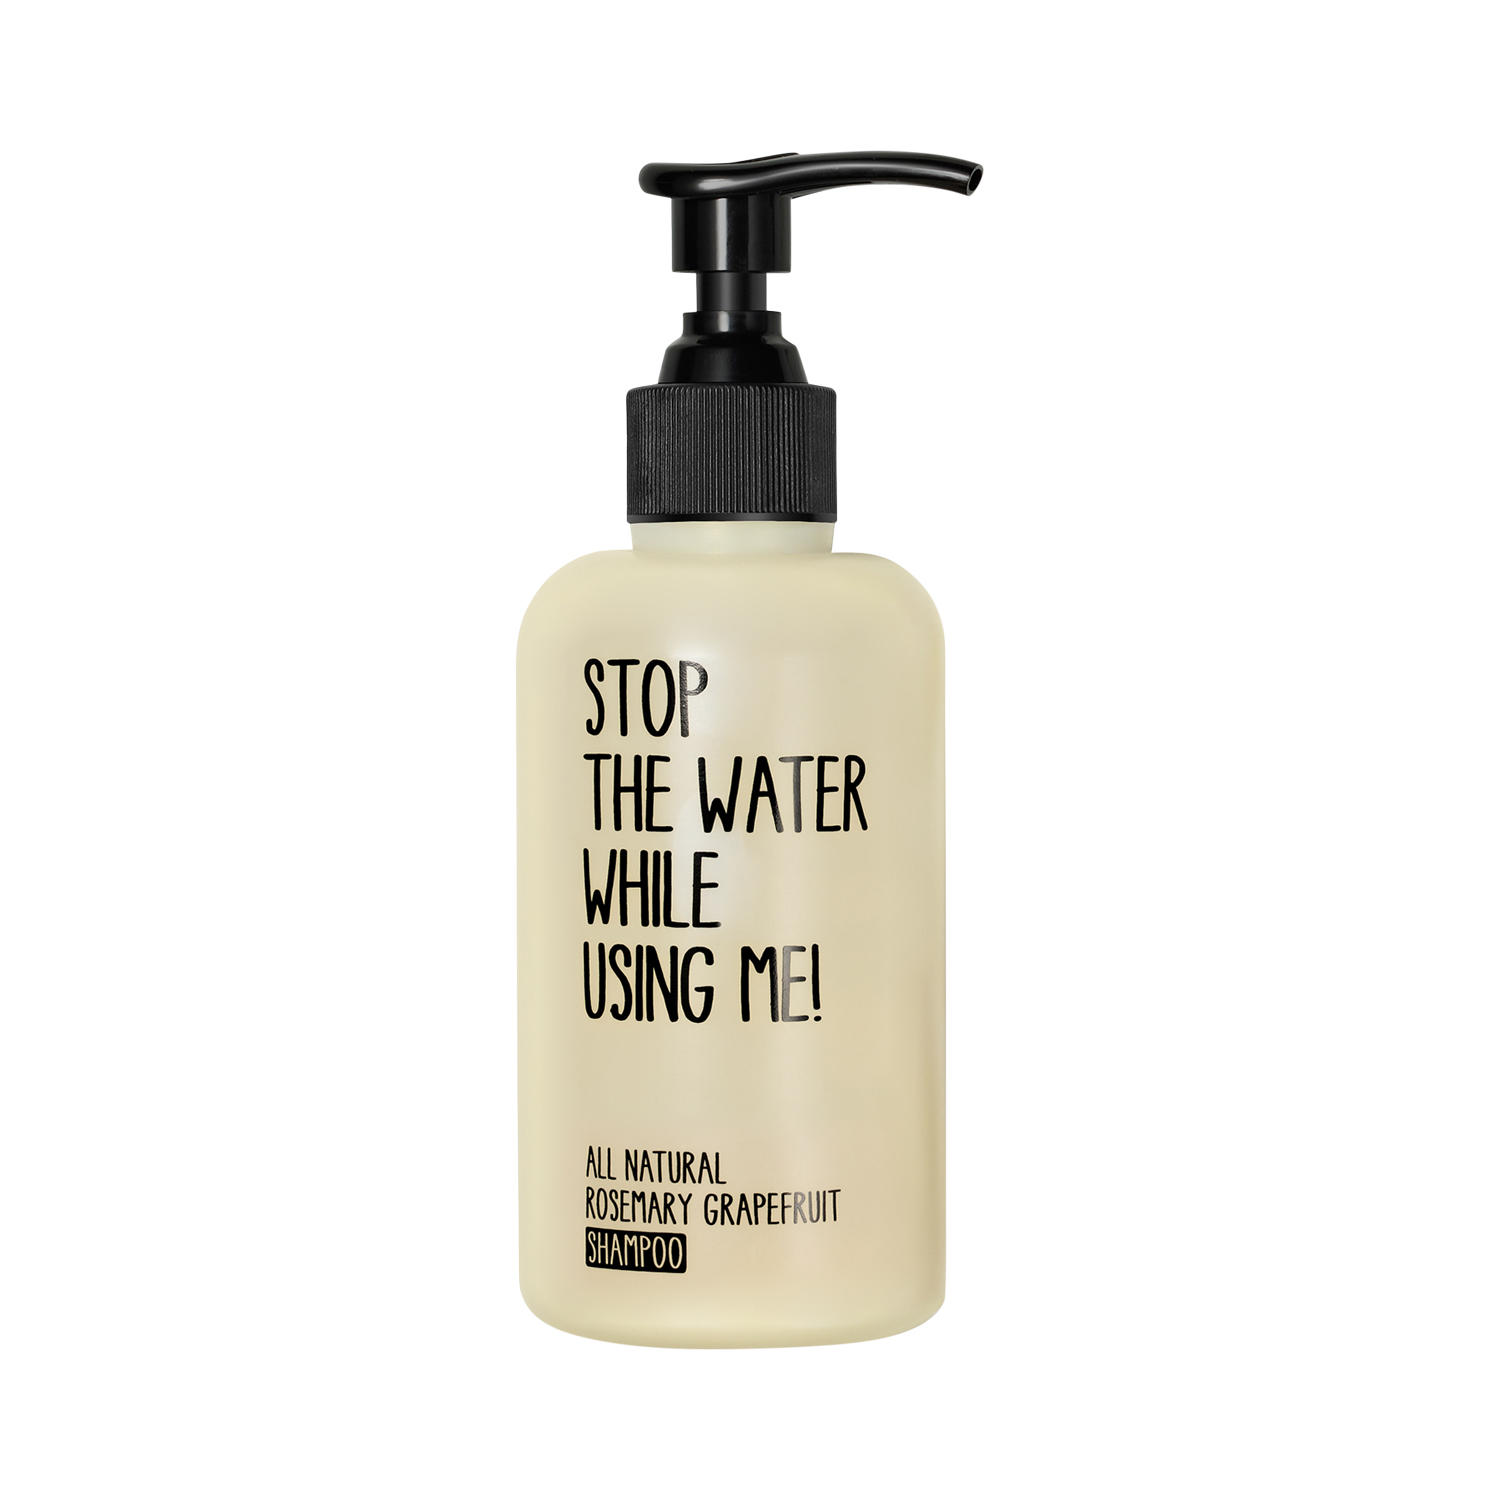 Stop The Water While Using Me! - All Natural Rosmarin Grapefruit Shampoo